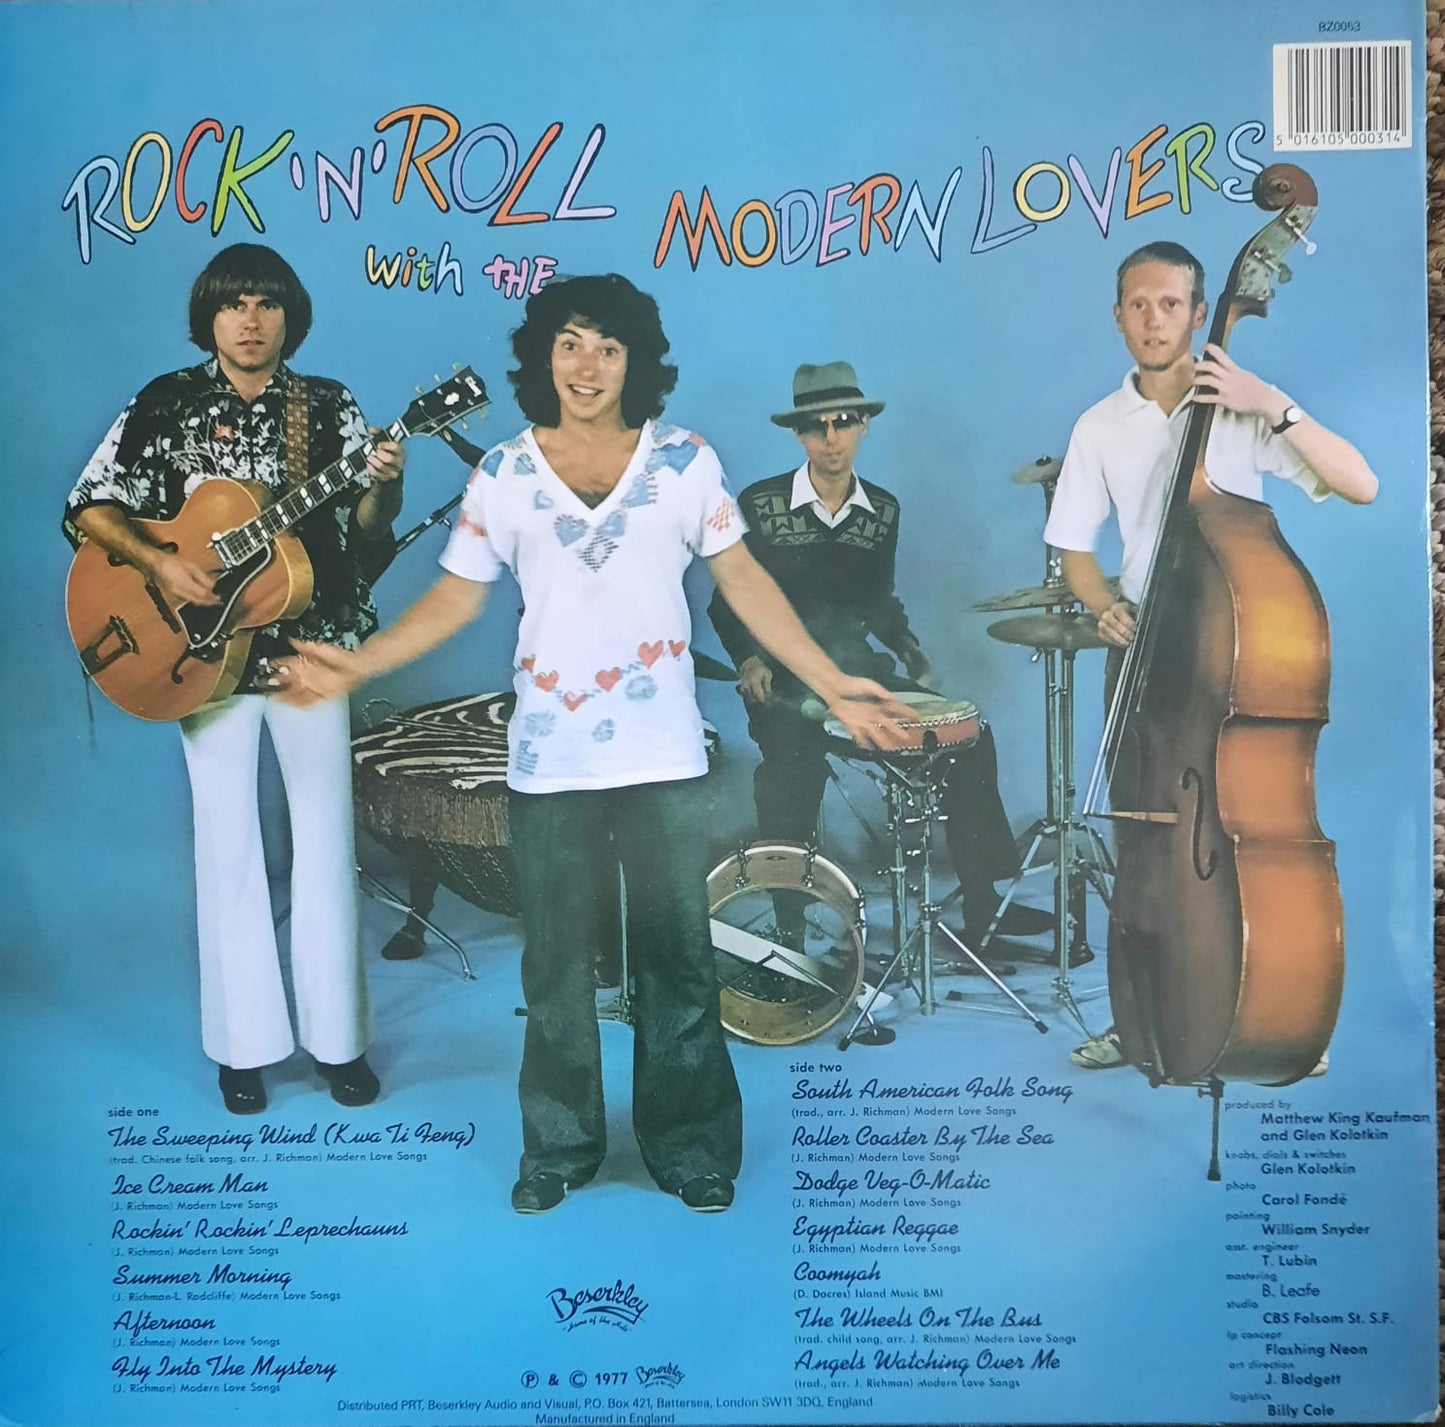 The Modern Lovers - Rock ´N´Roll With The Modern Lovers (LP, Reino Unido)